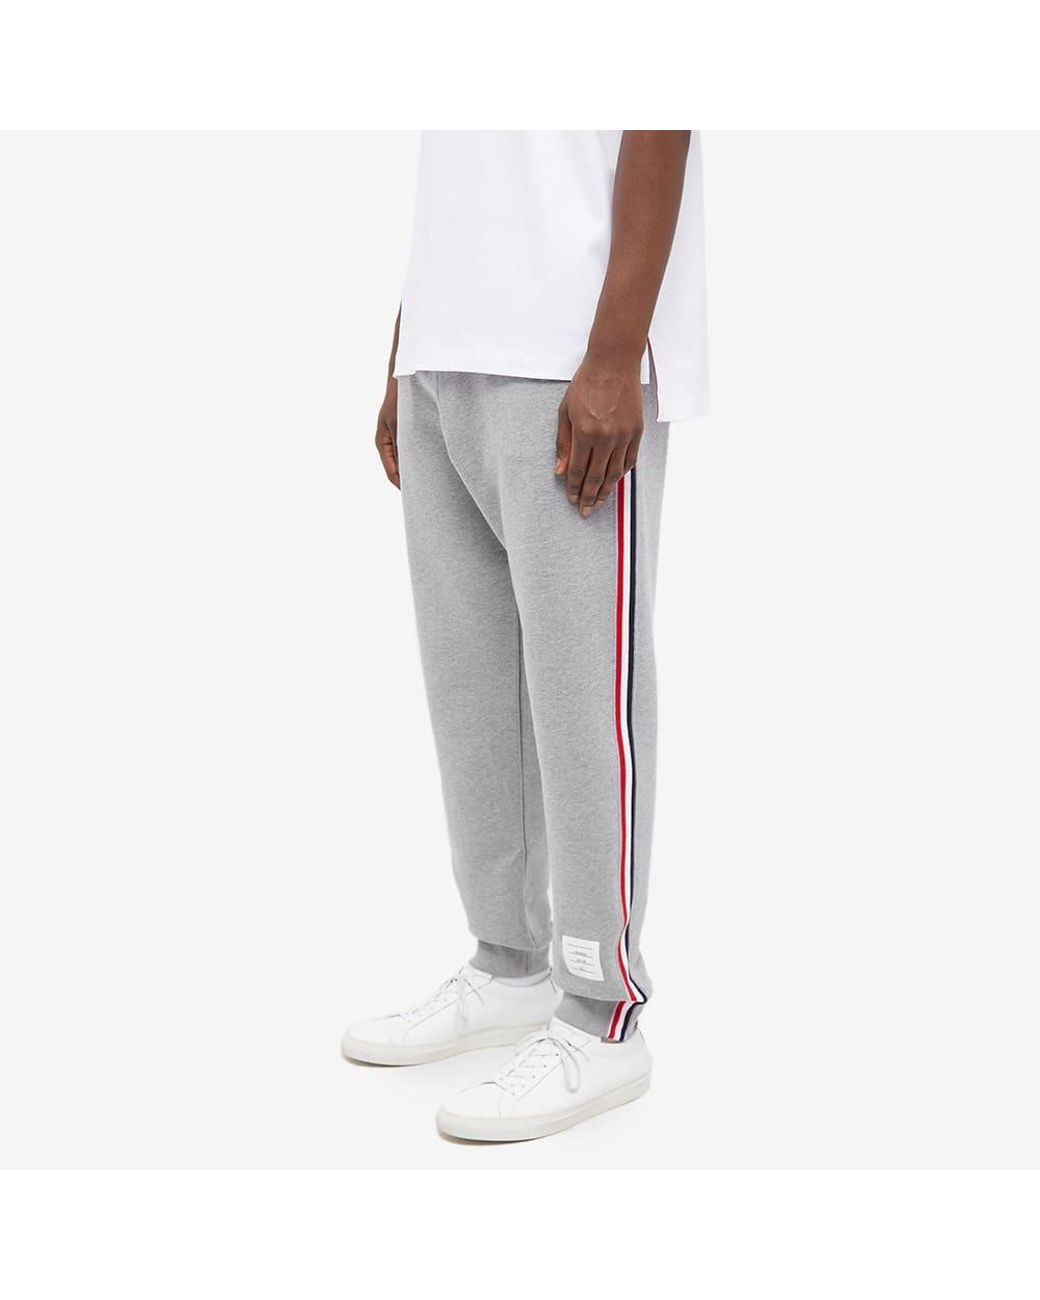 Thom Browne Tricolore Stripe Sweat Pant in Gray for Men | Lyst